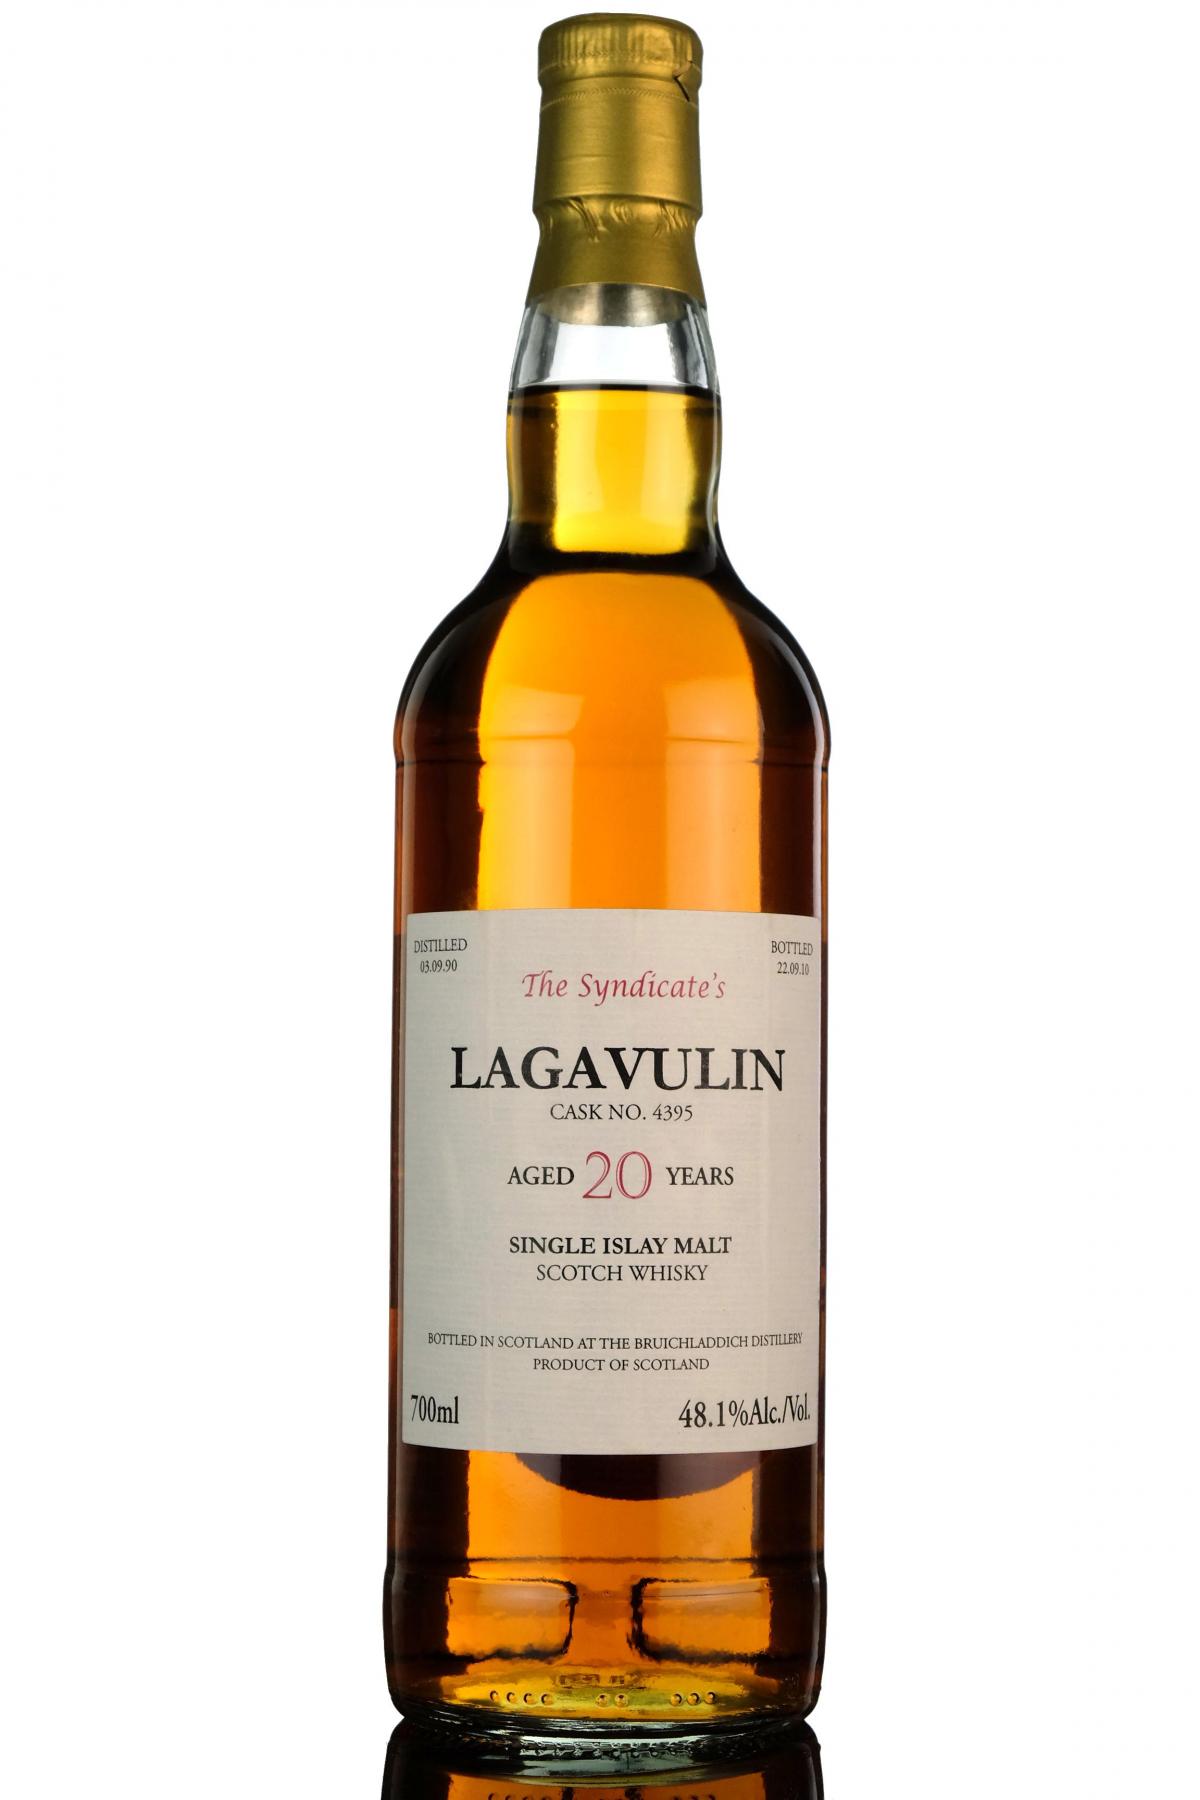 Lagavulin 1990-2010 - 20 Year Old - The Syndicate